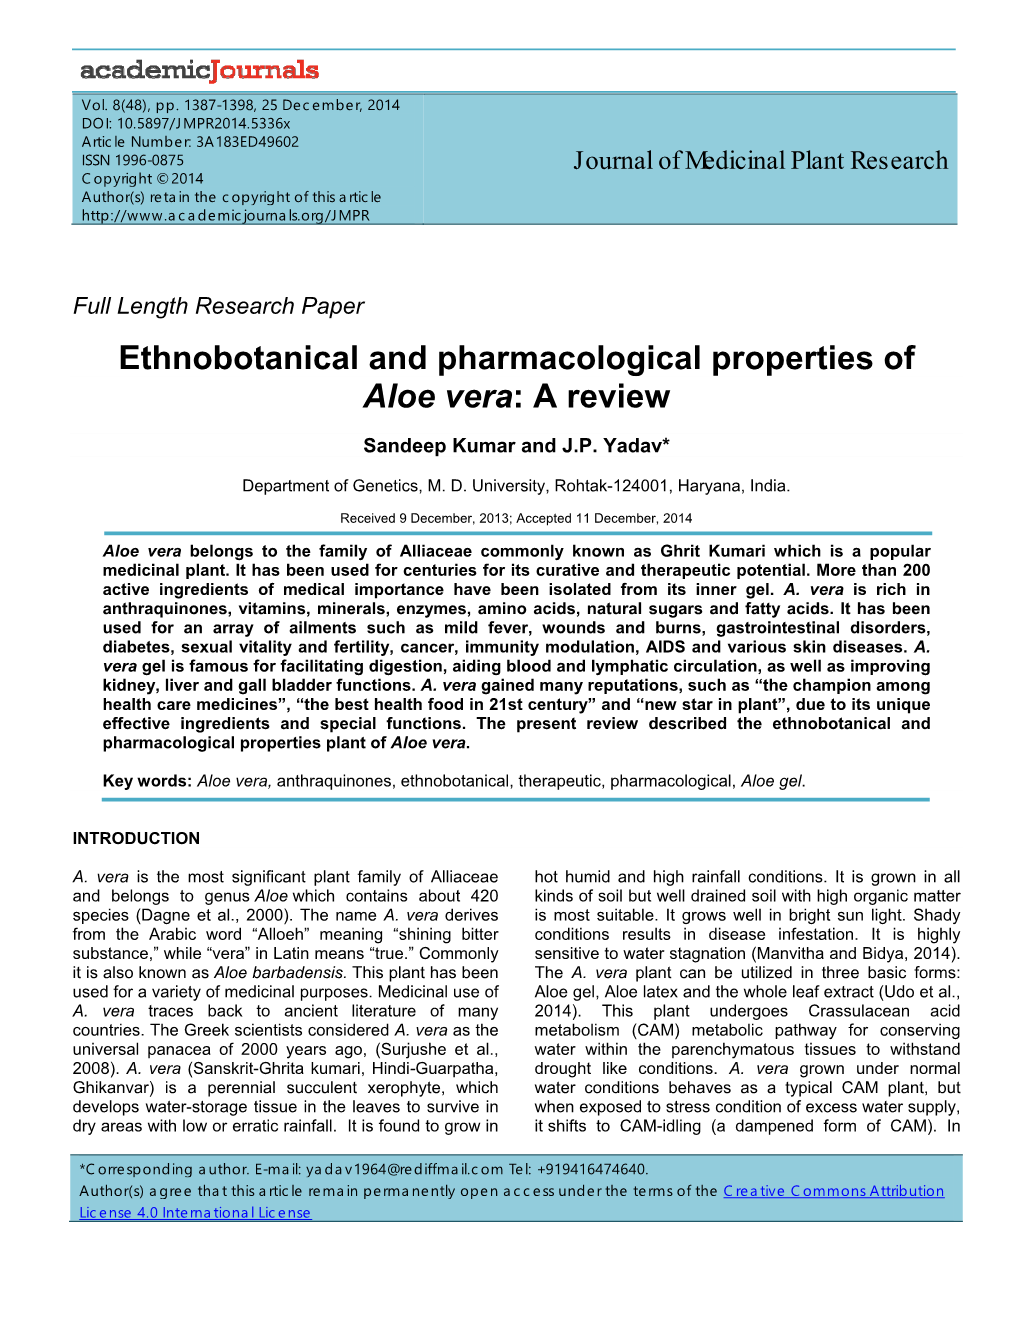 Ethnobotanical and Pharmacological Properties of Aloe Vera: a Review